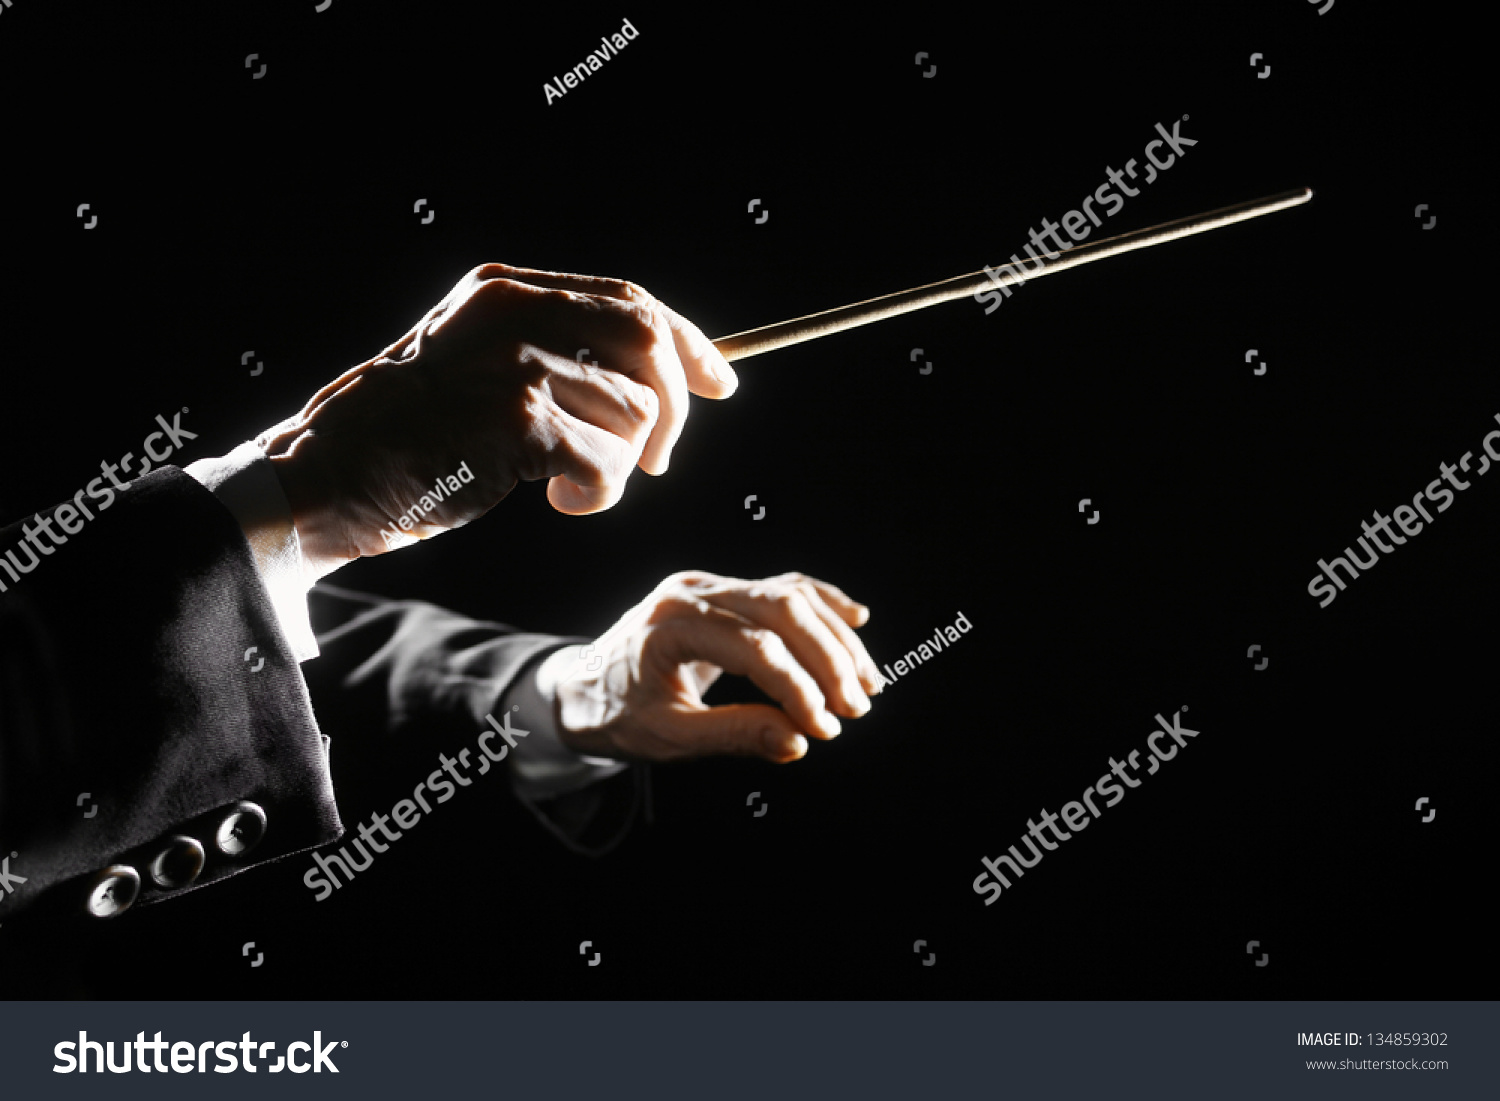 Orchestra conductor hands baton. Music director holding stick #134859302